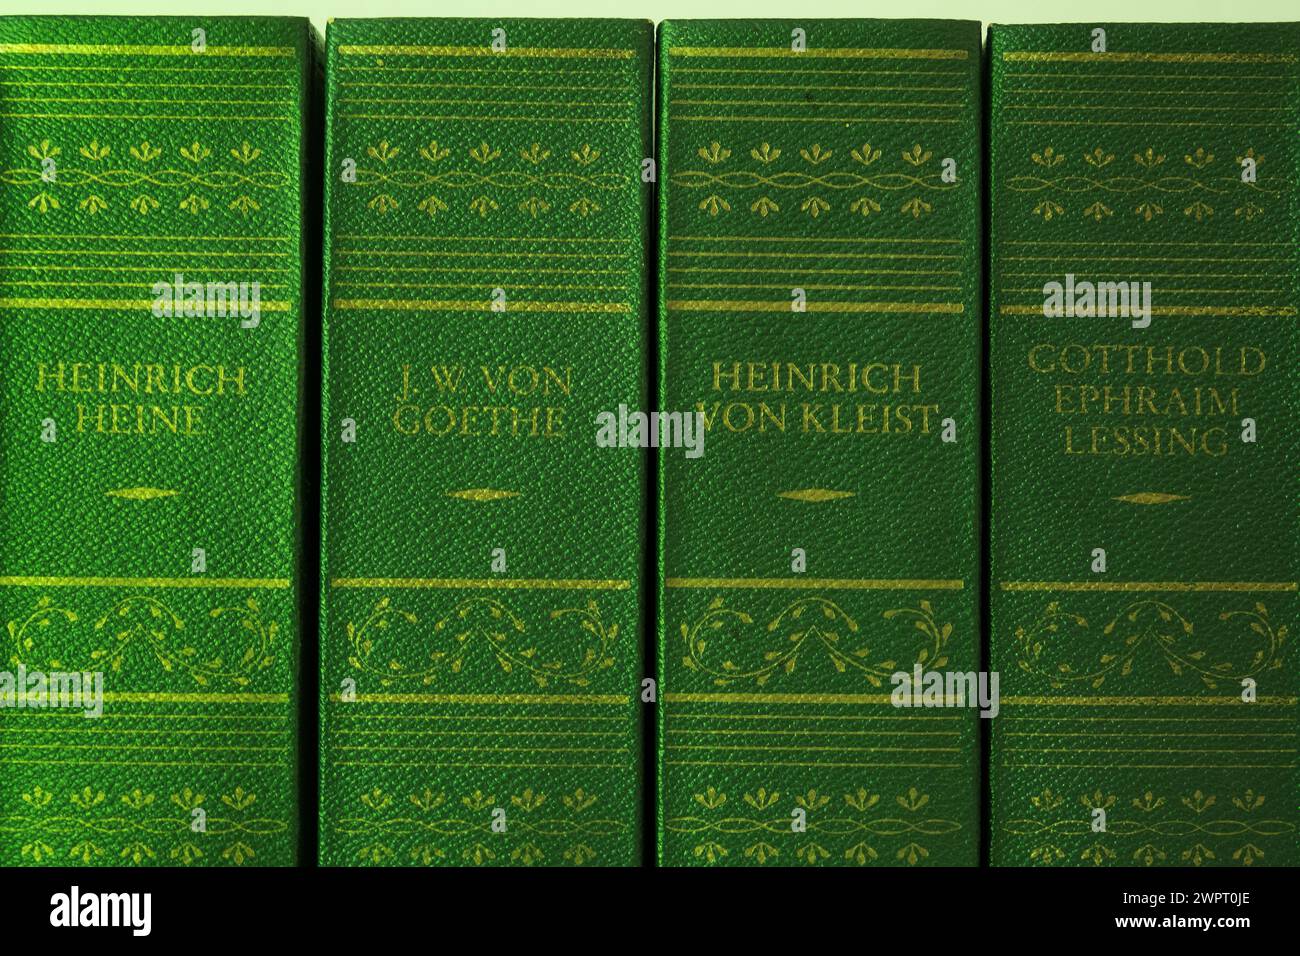 Old books with green covers or book edges are tested for the toxic arsenic. Stock Photo